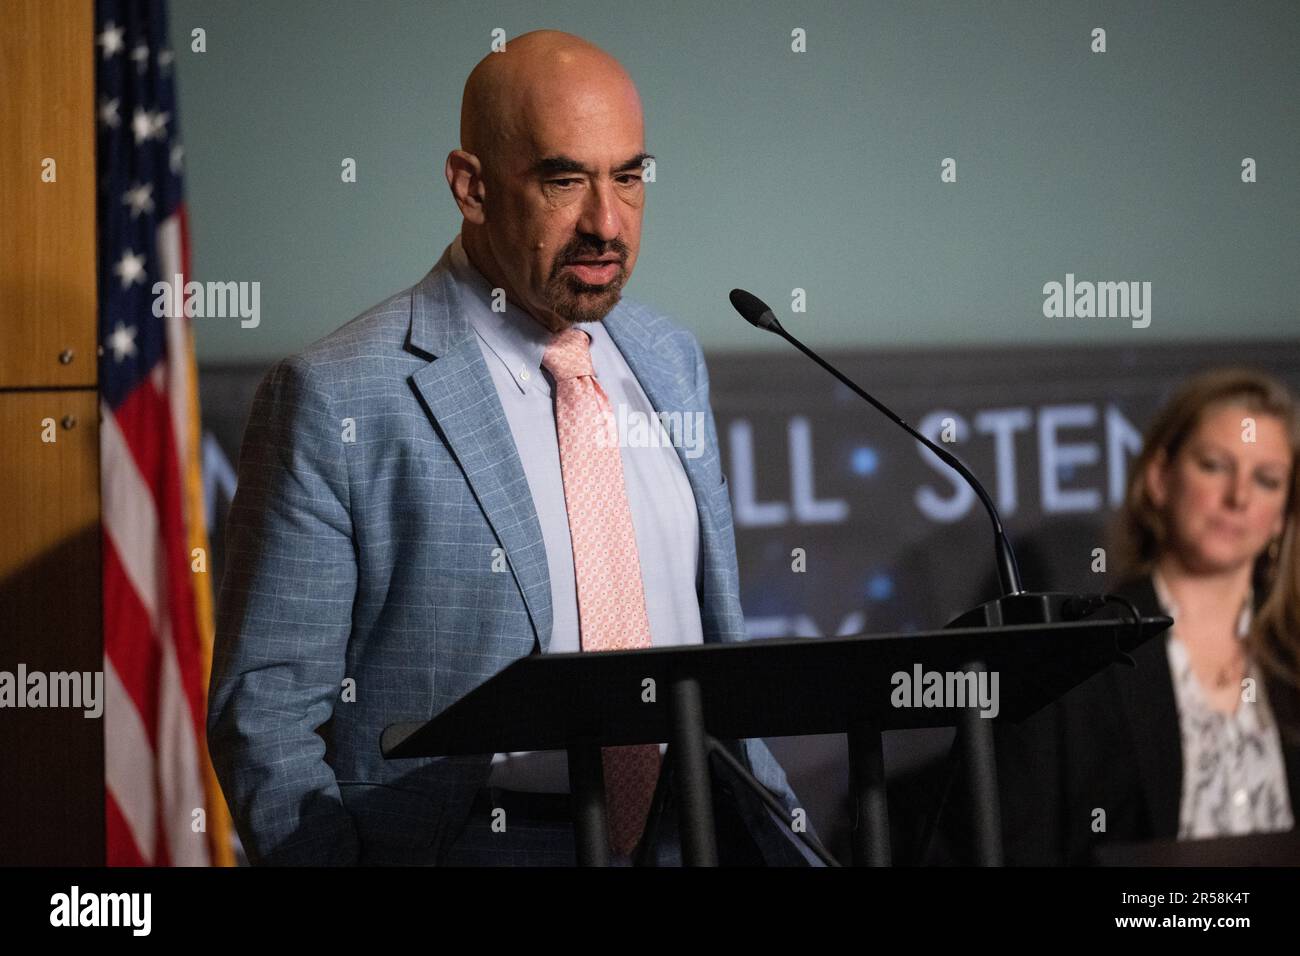 Washington, United States Of America. 31st May, 2023. Washington, United States of America. 31 May, 2023. David Spergel, chair of the NASA independent study on unidentified anomalous phenomena and President of the Simons Foundation, speaks during a public meeting of the task force at the Mary W. Jackson NASA Headquarters building, May 31, 2023 in Washington, DC The UAP task force is looking for answers to what is commonly called UFO's. Credit: Joel Kowsky/NASA/Alamy Live News Stock Photo